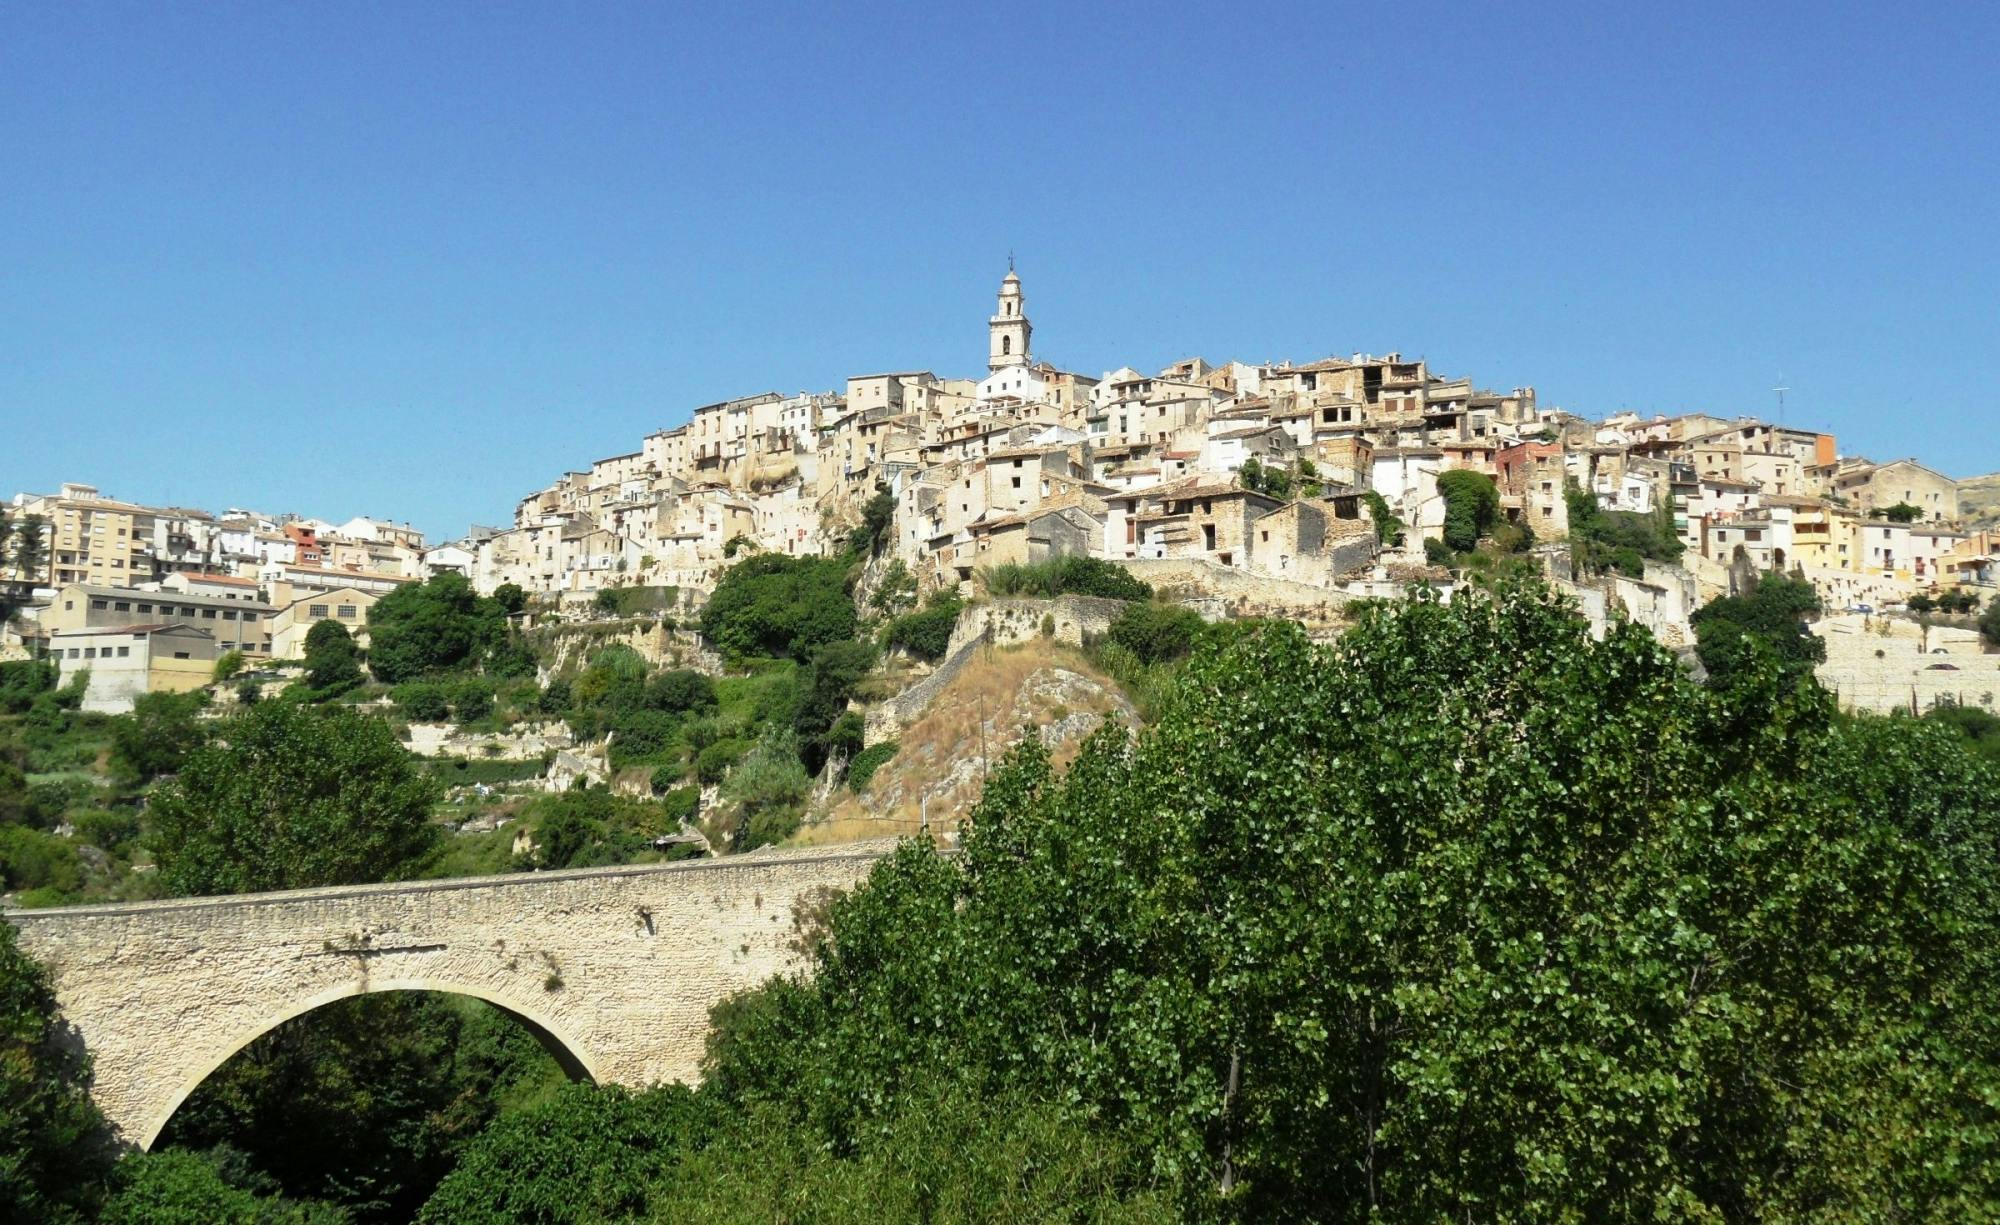 Guided tour of Bocairent and the Islamic labyrinth from Alicante